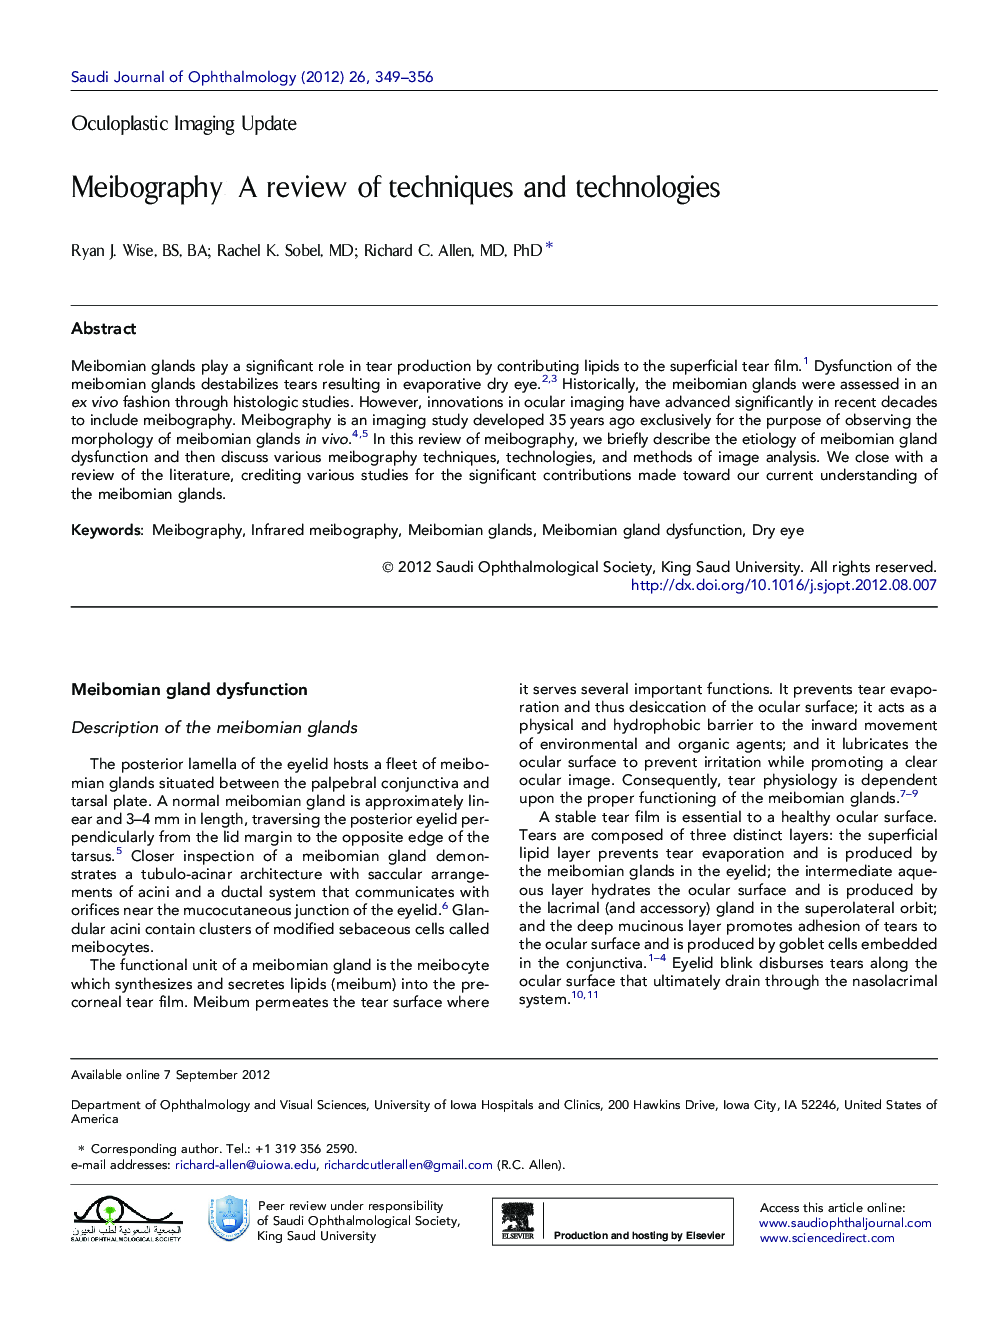 Meibography: A review of techniques and technologies 